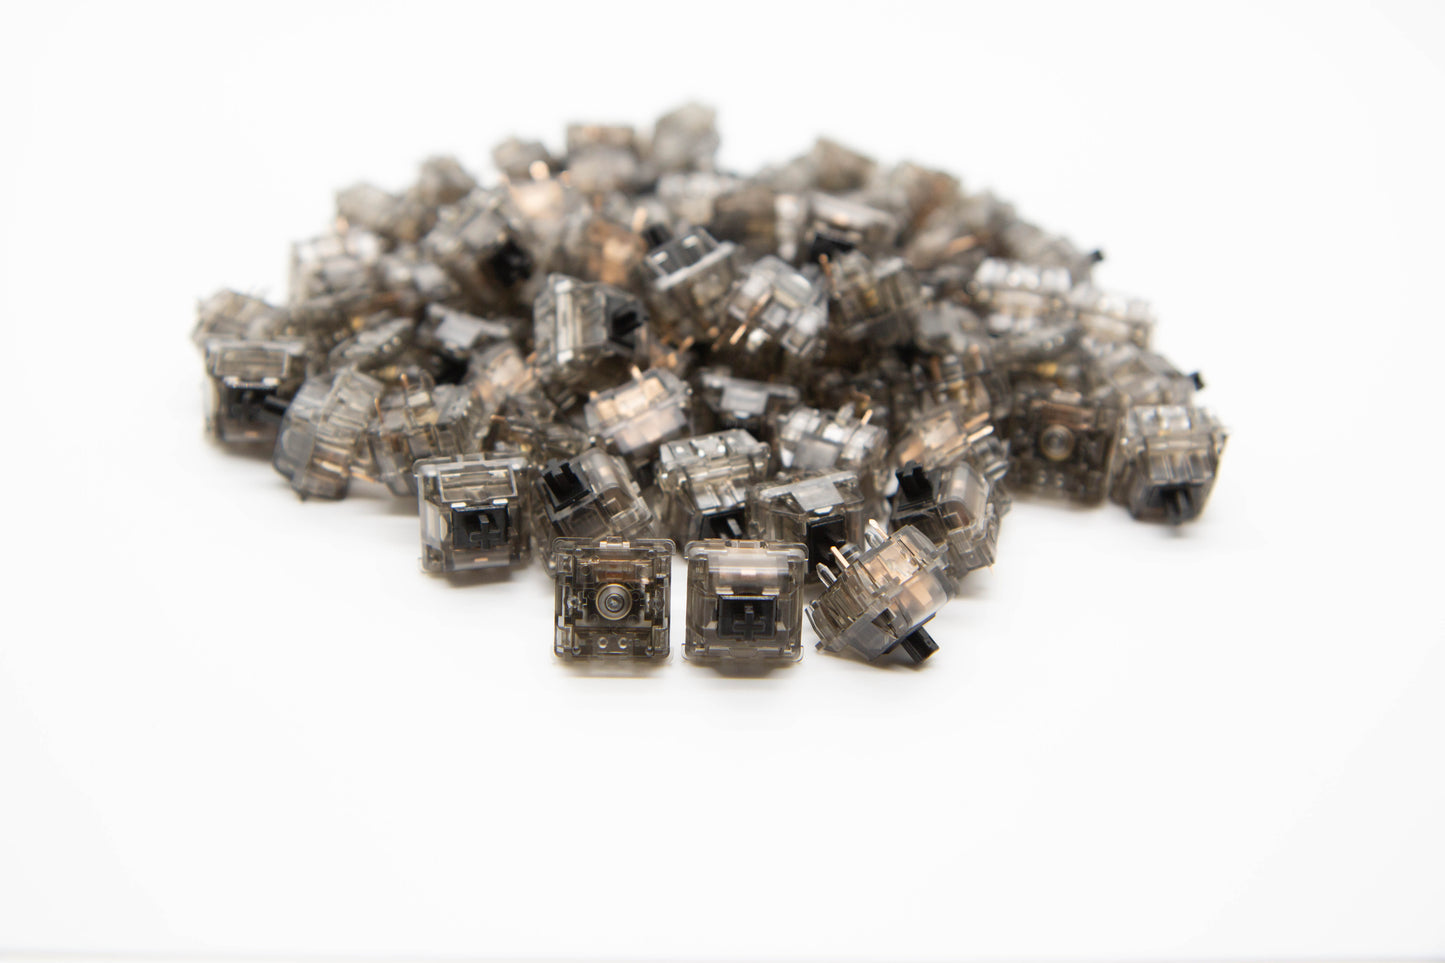 Close-up shot of a pile of Durock Linear-78 g mechanical keyboard switches featuring gray transparent housing and black stems